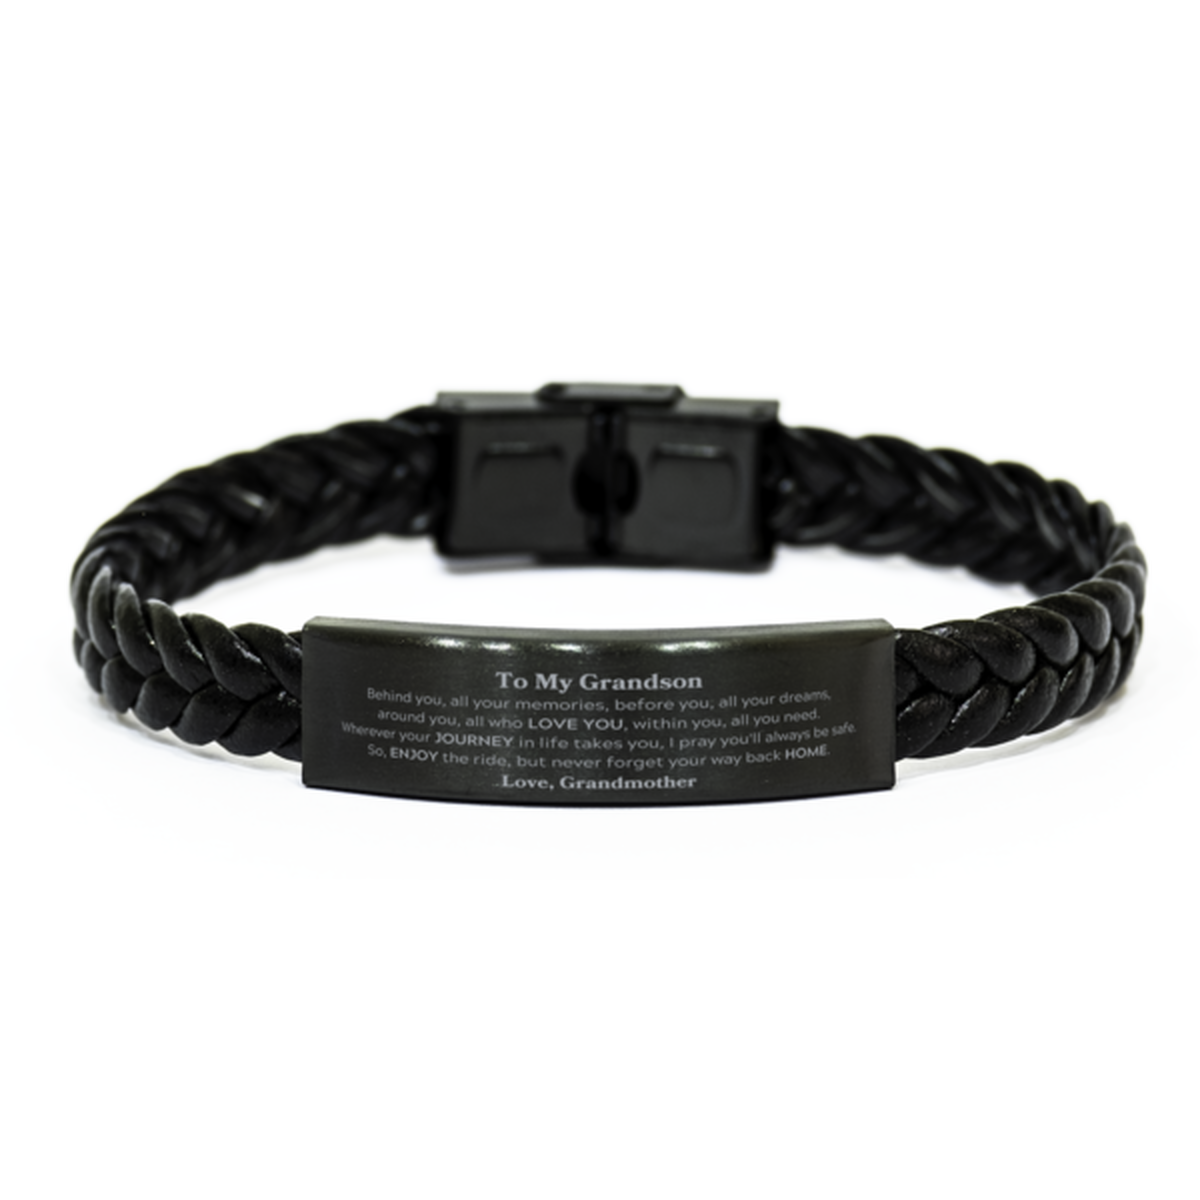 To My Grandson Graduation Gifts from Grandmother, Grandson Braided Leather Bracelet Christmas Birthday Gifts for Grandson Behind you, all your memories, before you, all your dreams. Love, Grandmother